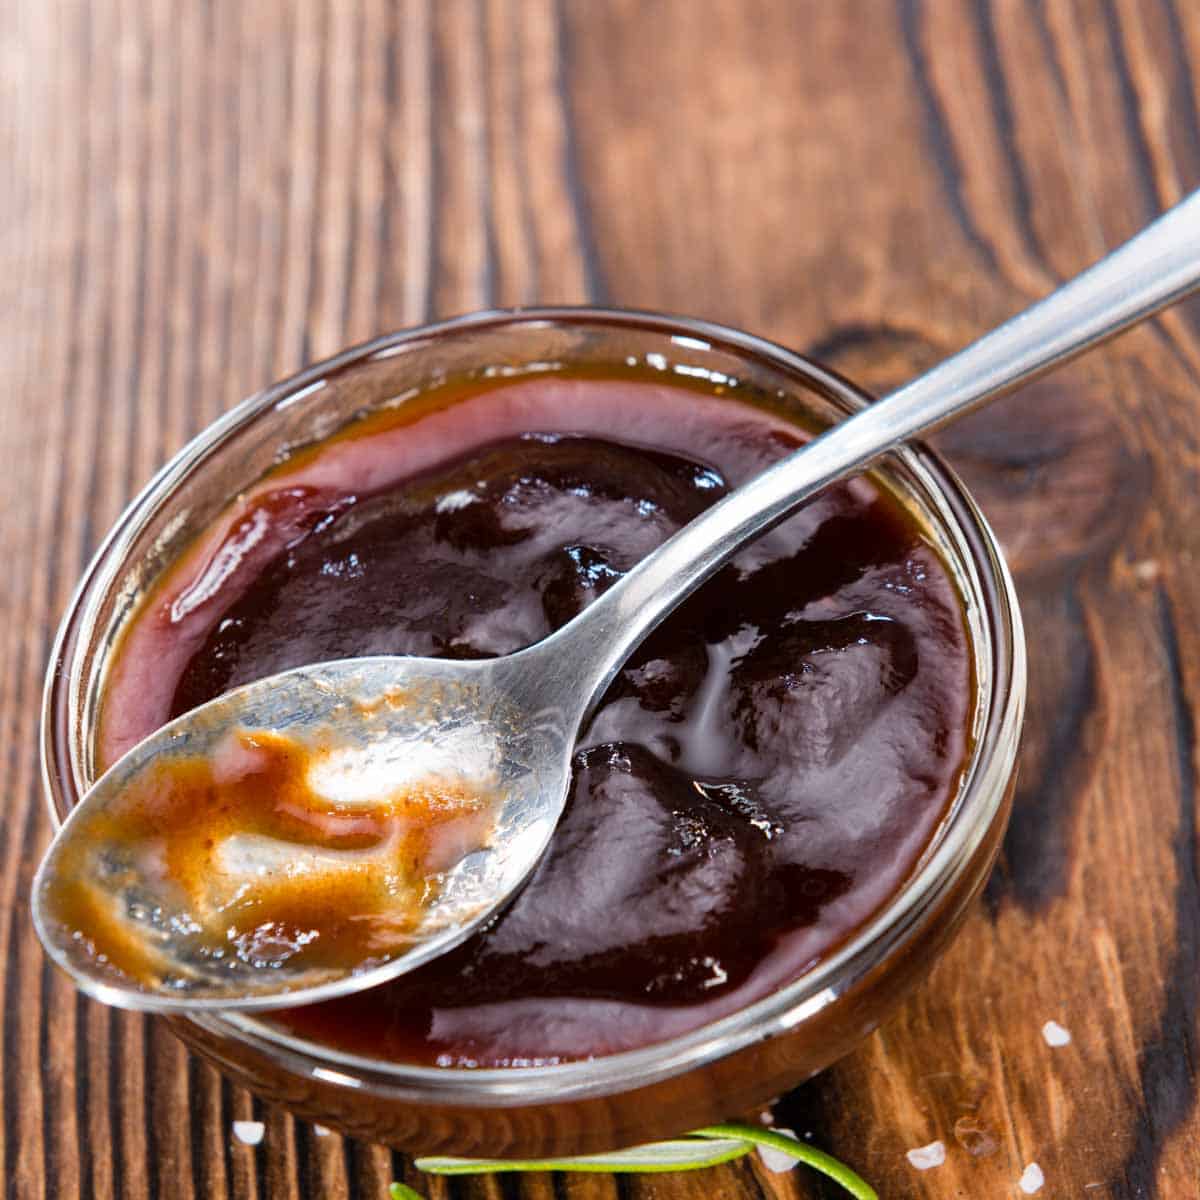 A dish of barbeque sauce sits on a wooden background with a spoon.